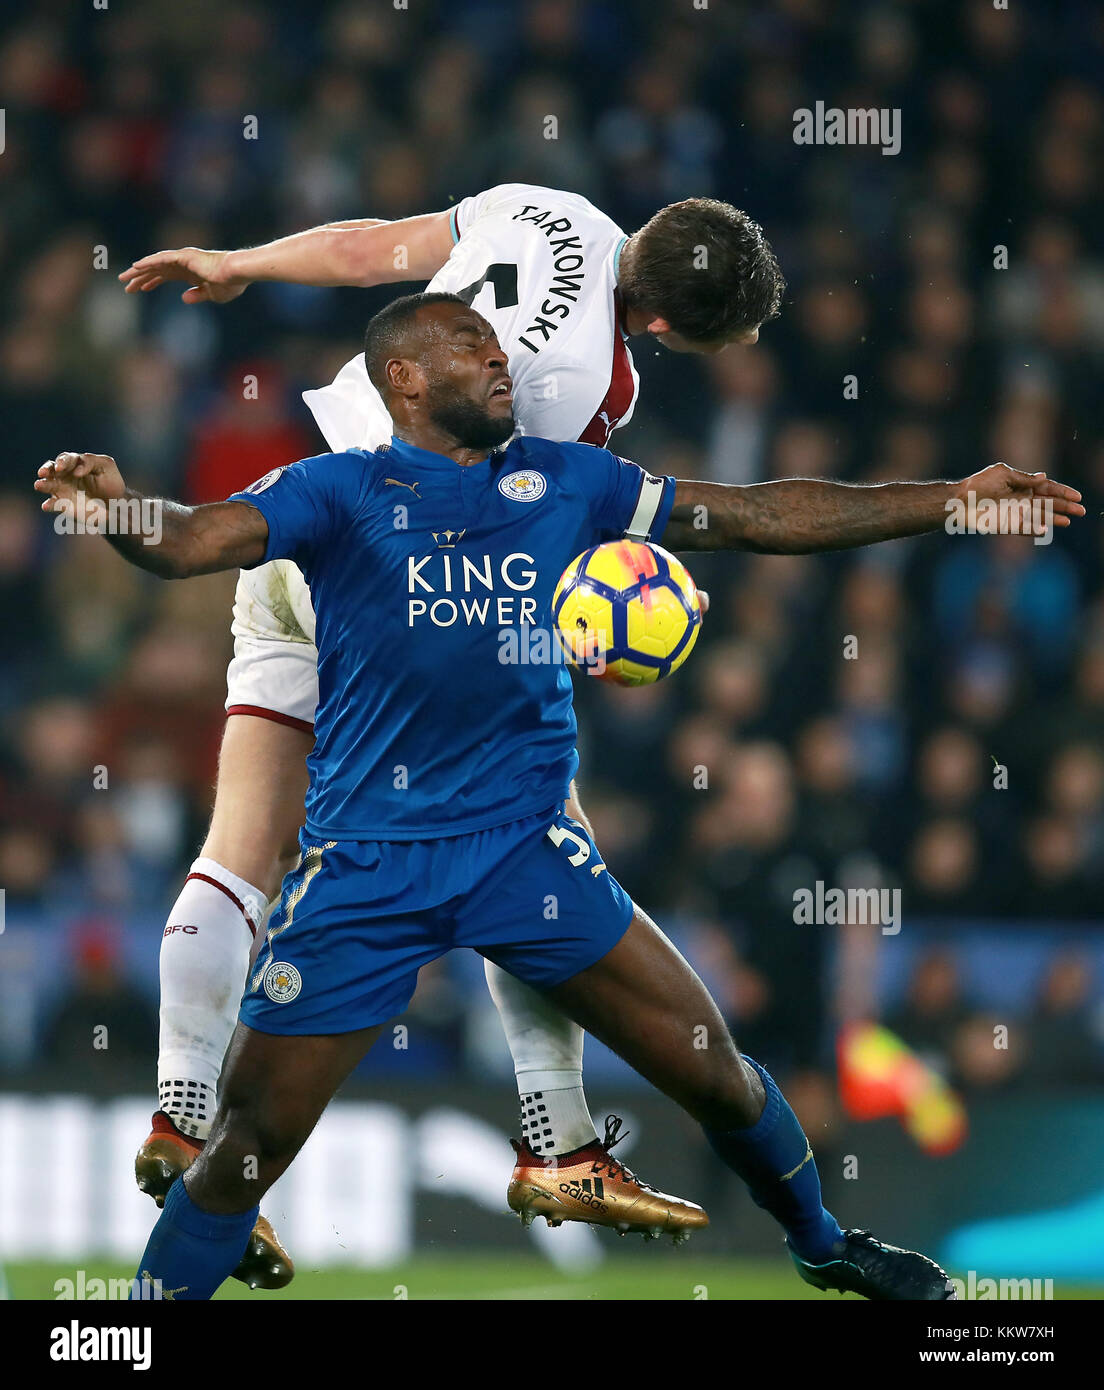 Leicester City's Wes Morgan (front) and Burnley's James Tarkowski battle for a header during the Premier League match at the King Power Stadium, Leicester. PRESS ASSOCIATION Photo Picture date: Saturday December 2, 2017. See PA story SOCCER Leicester. Photo credit should read: Mike Egerton/PA Wire. RESTRICTIONS: No use with unauthorised audio, video, data, fixture lists, club/league logos or 'live' services. Online in-match use limited to 75 images, no video emulation. No use in betting, games or single club/league/player publications. Stock Photo